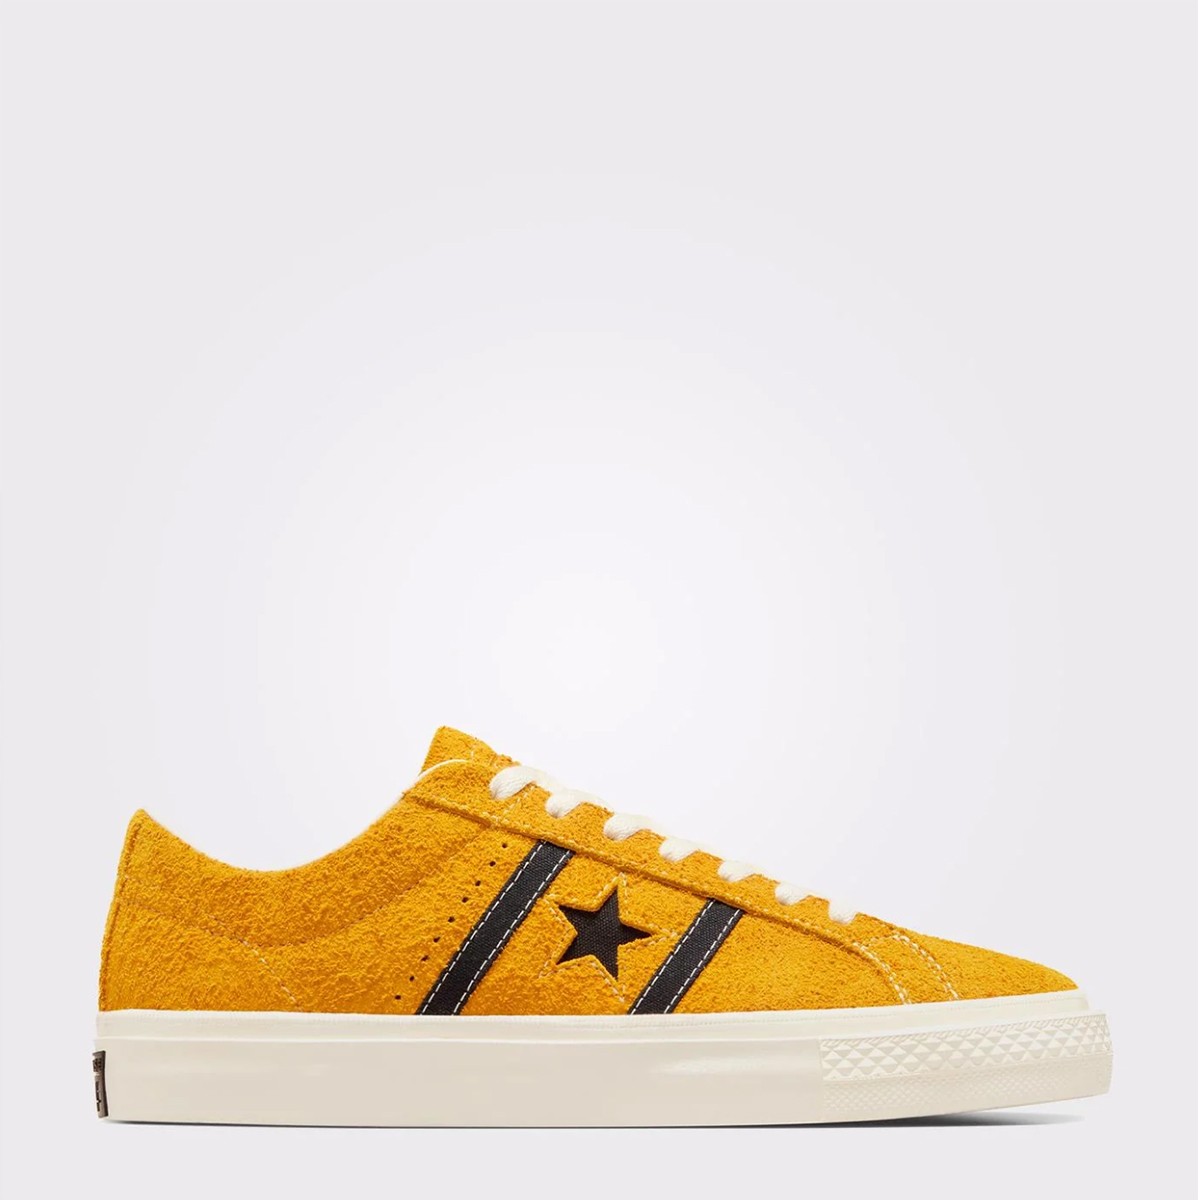 ONE STAR ACADEMY PRO SUEDE - A06425C.740